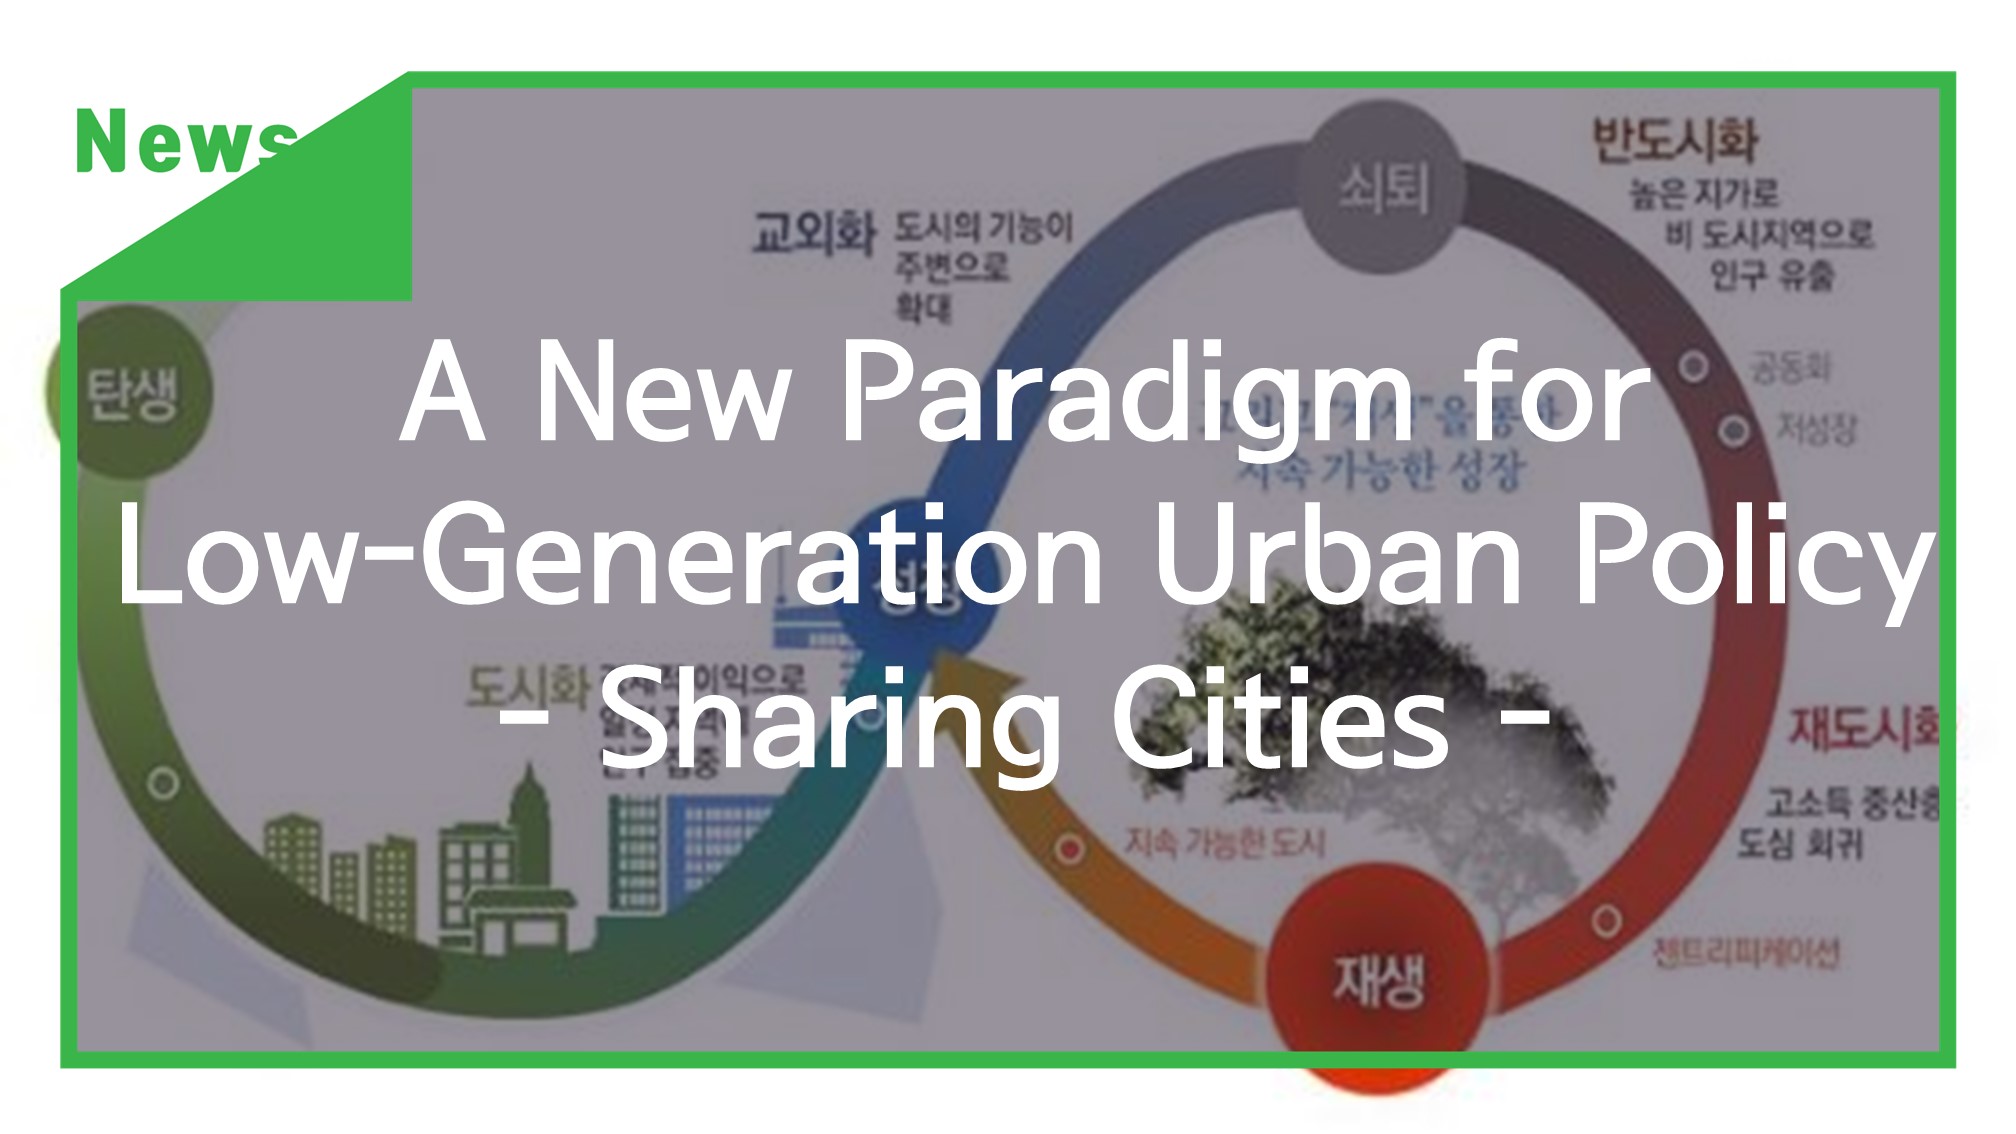 [News] A New Paradigm for Low-Generation Urban Policy - Sharing Cities